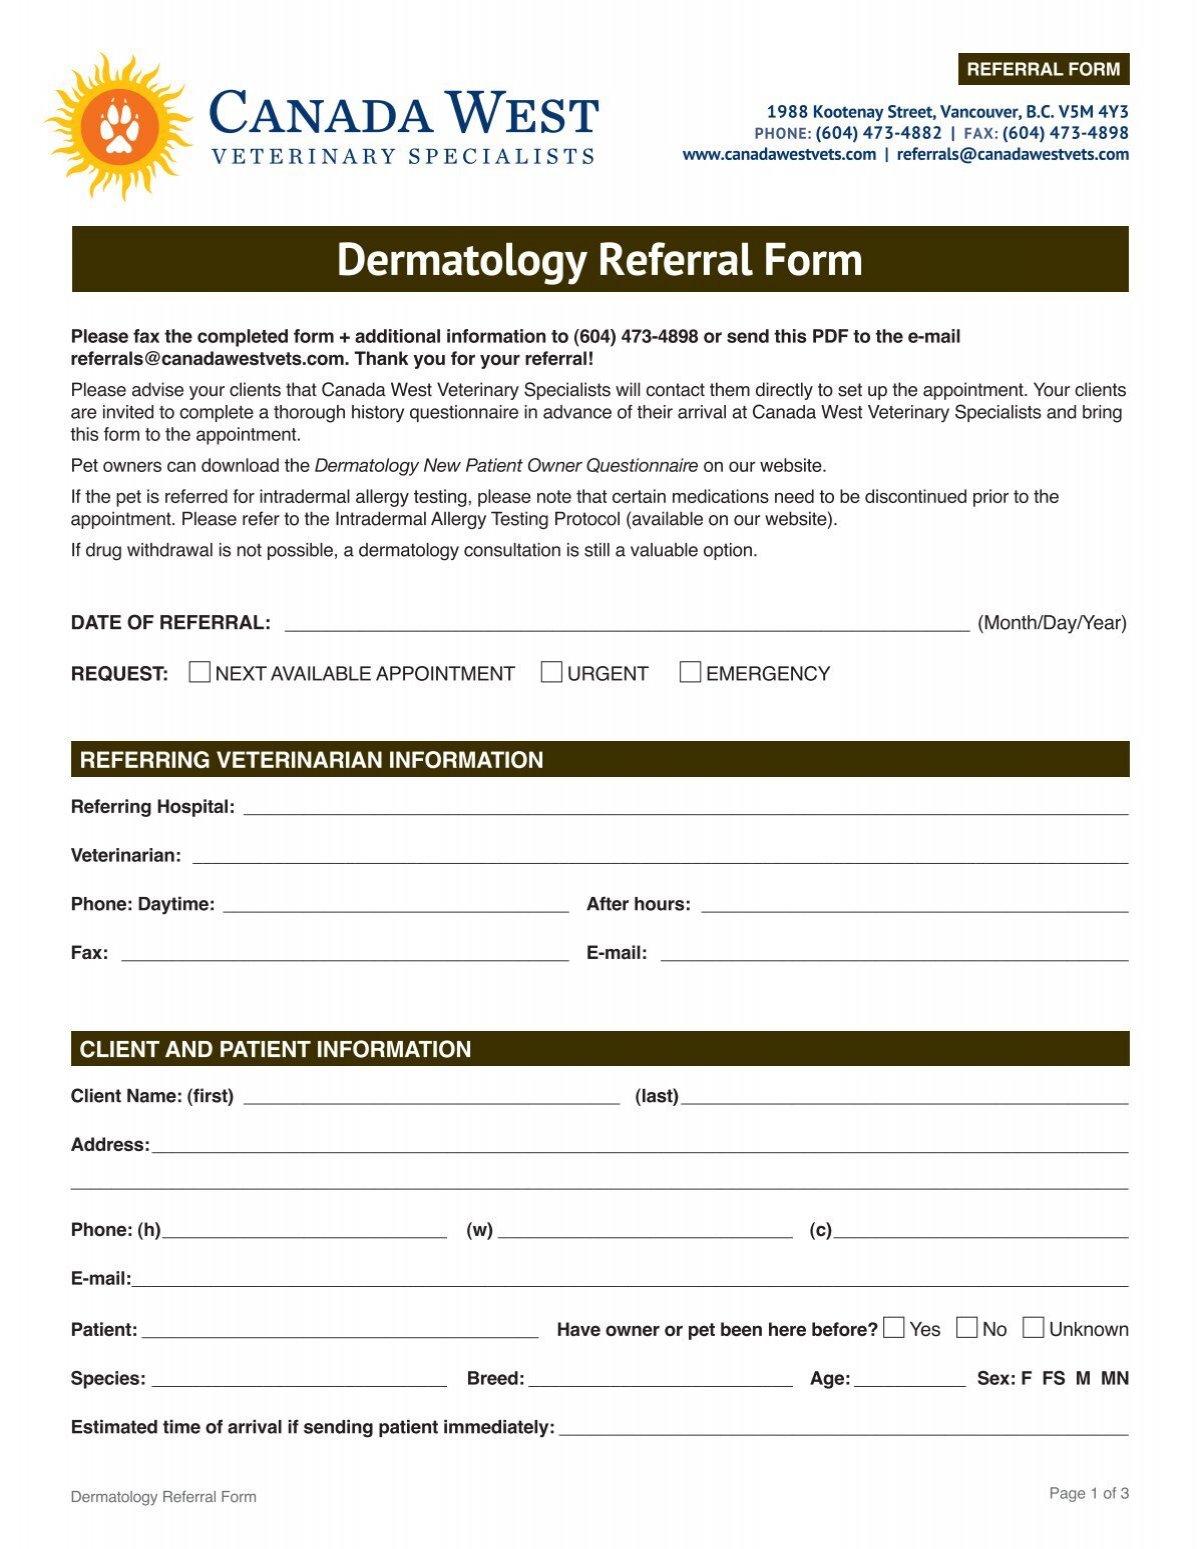 dermatology-referral-form-canada-west-veterinary-specialists